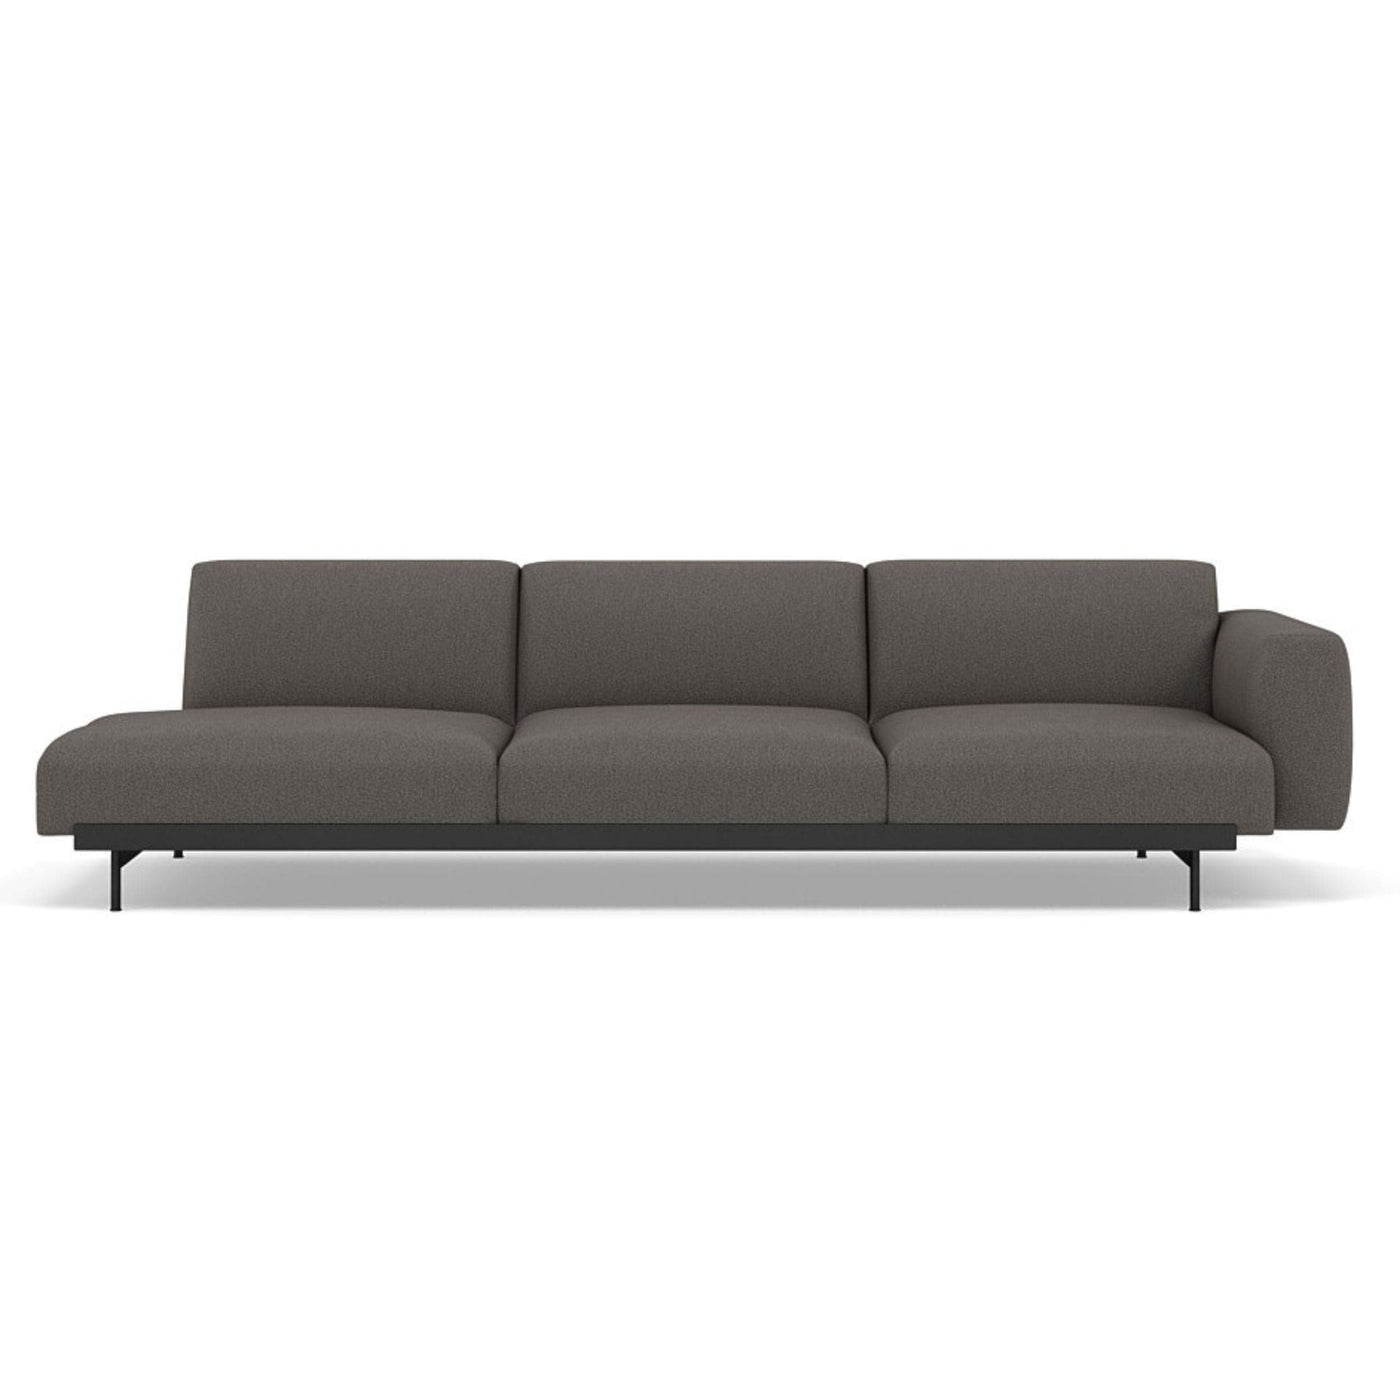 Muuto In Situ Modular 3 Seater Sofa, configuration 2. Made to order from someday designs. #colour_clay-9